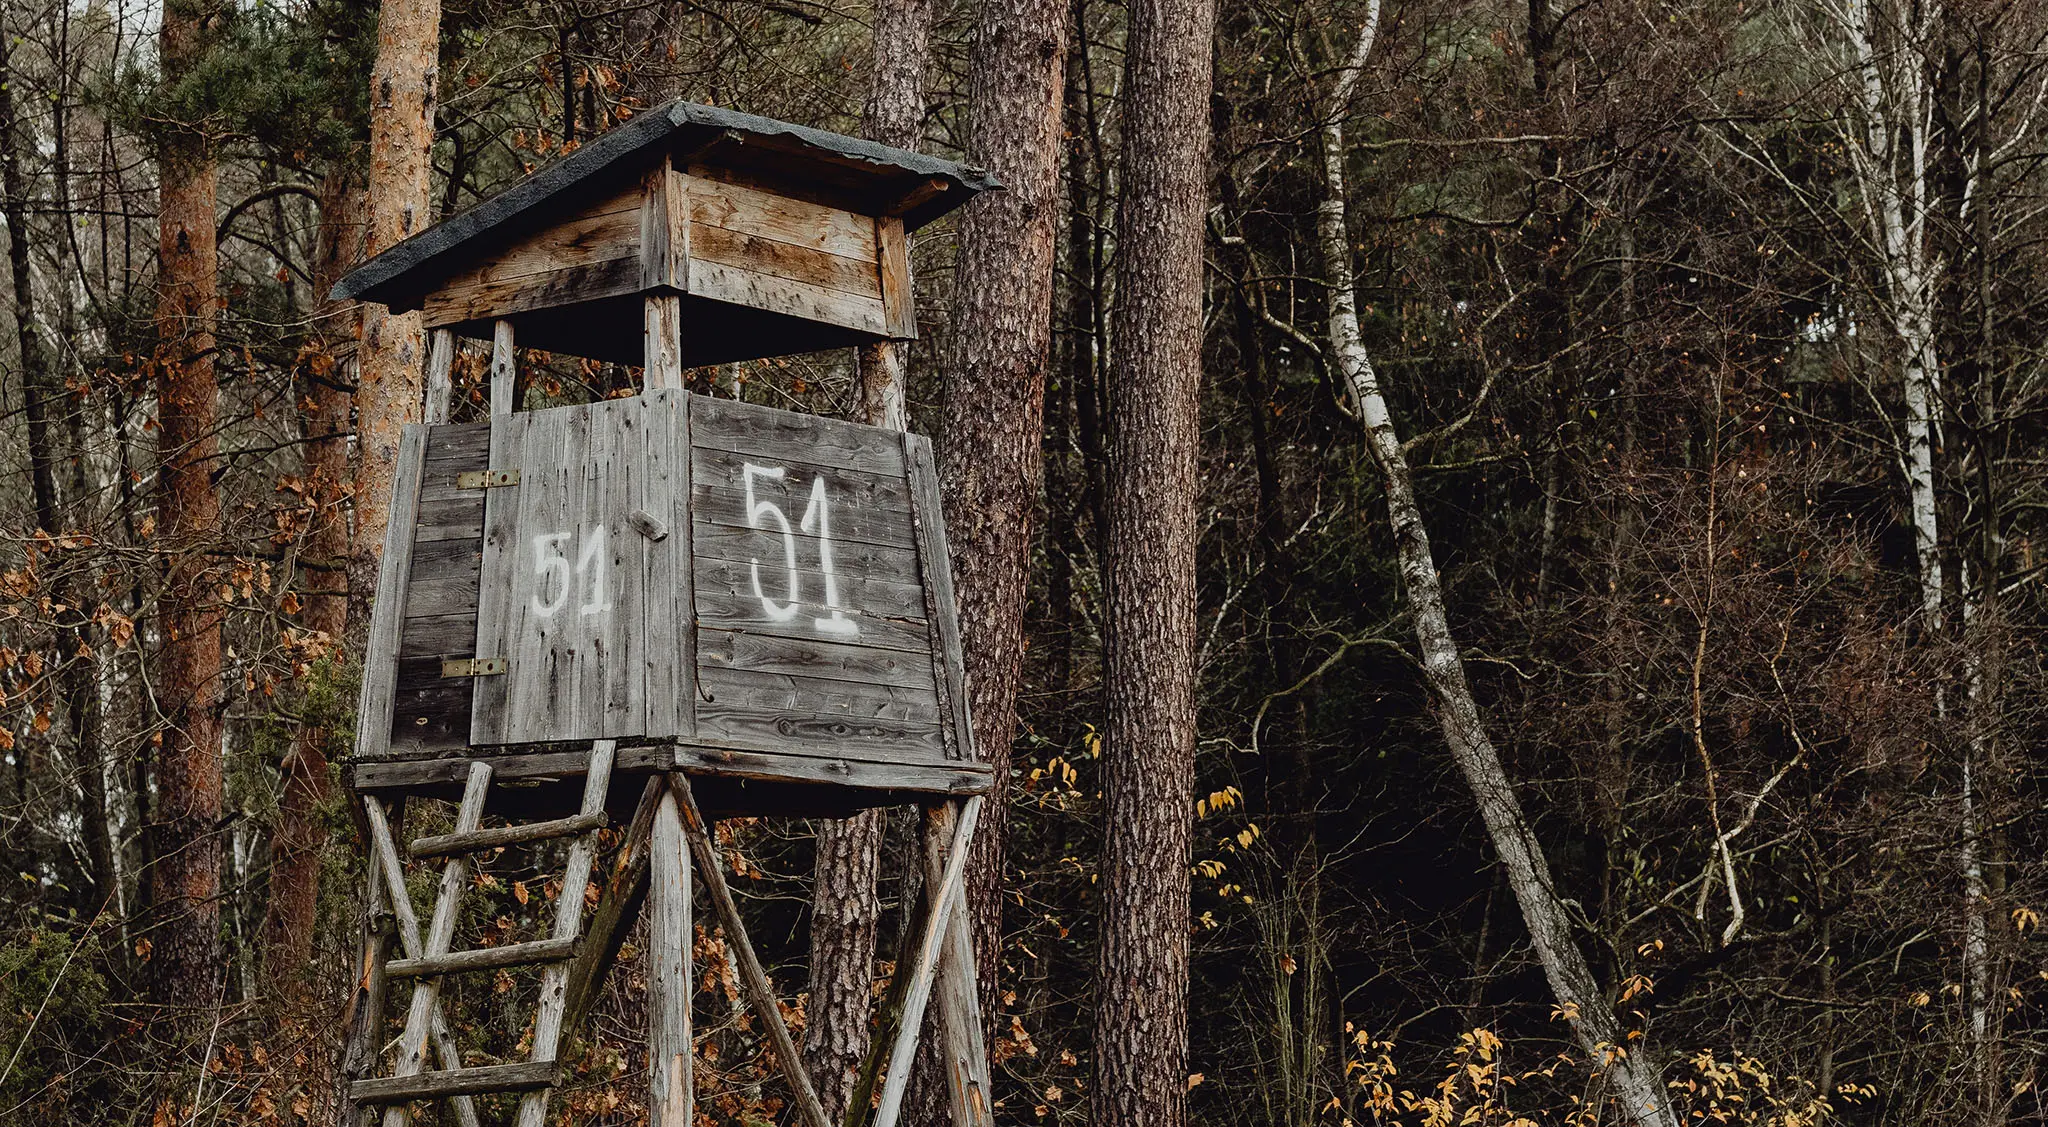 A hunting blind in the woods